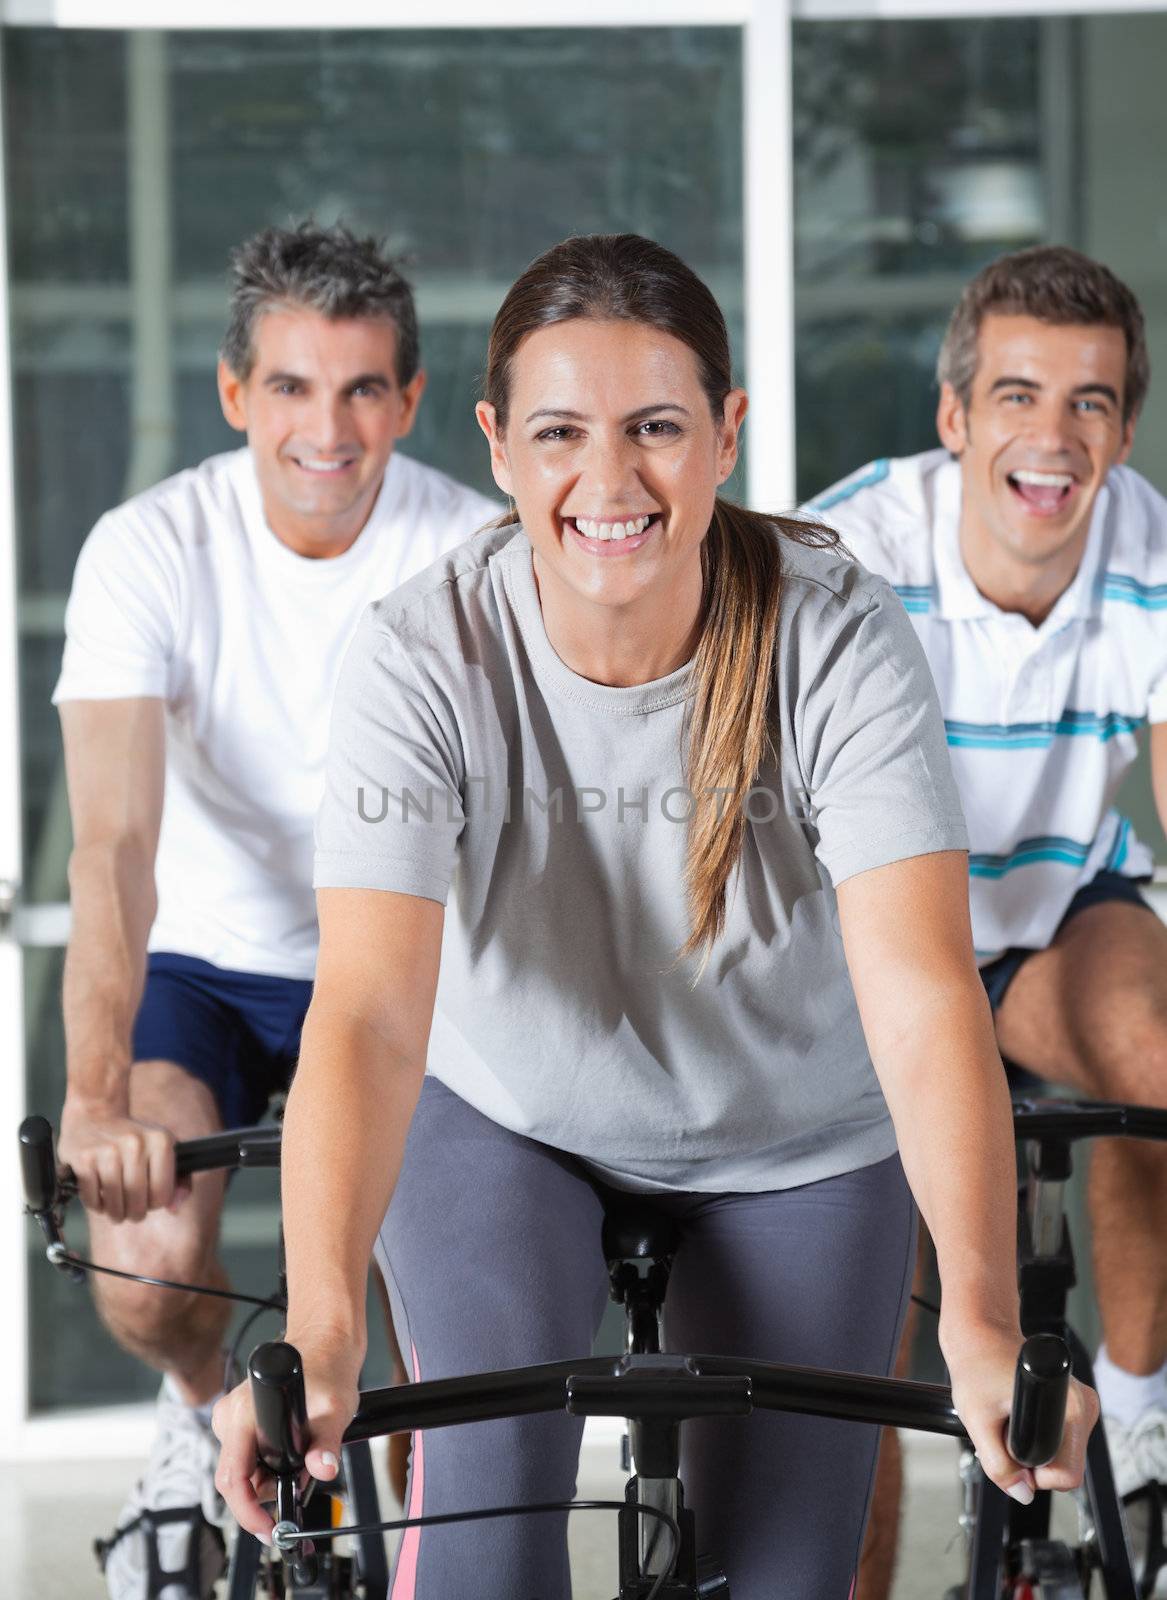 Men And Woman On Exercise Bikes by leaf